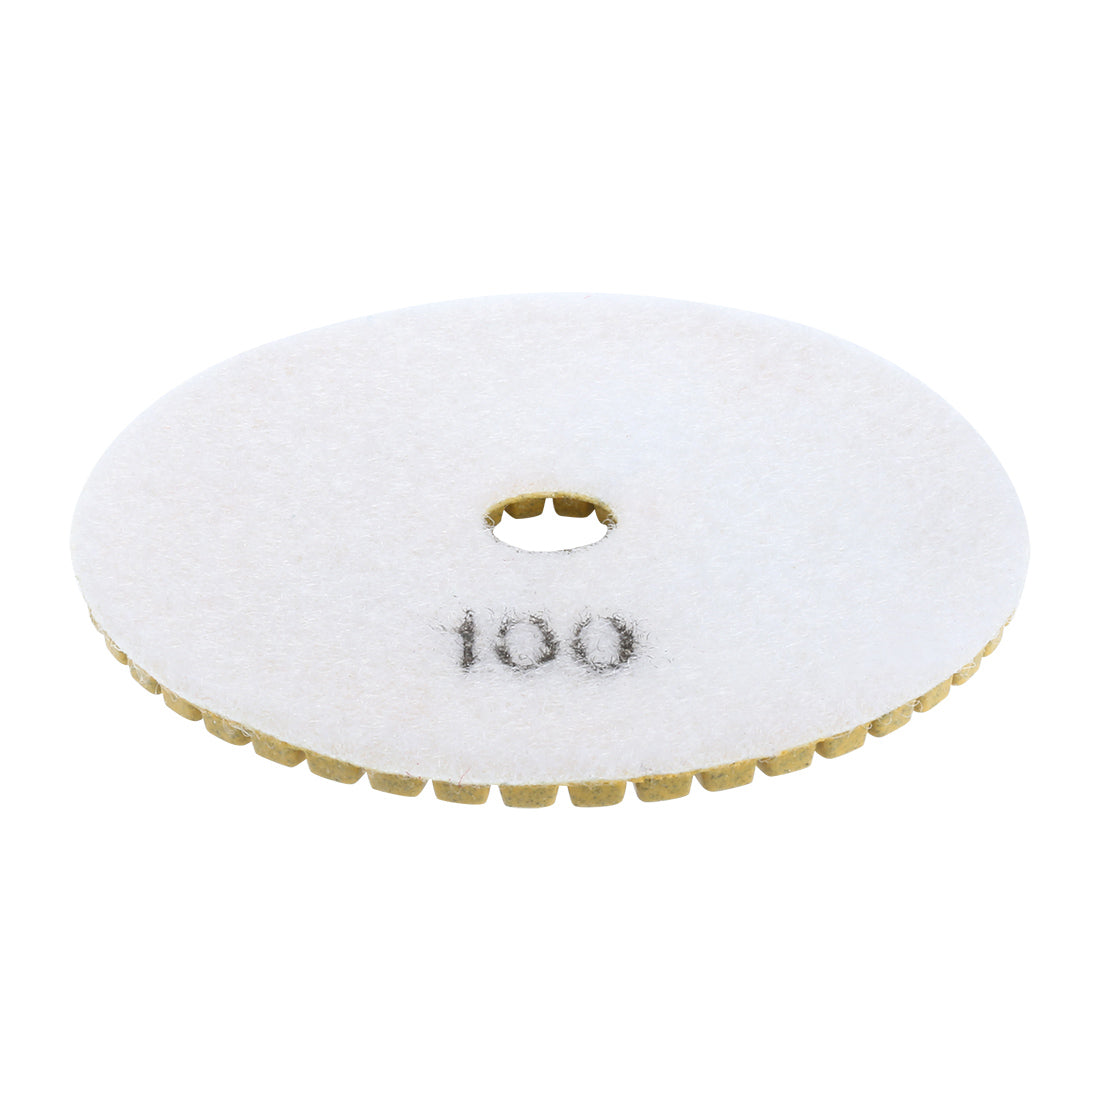 uxcell Uxcell 4" marble Wet Polishing Pad Grit 100 10pcs for Granite Concrete Marble with a Rubber Backer Pad